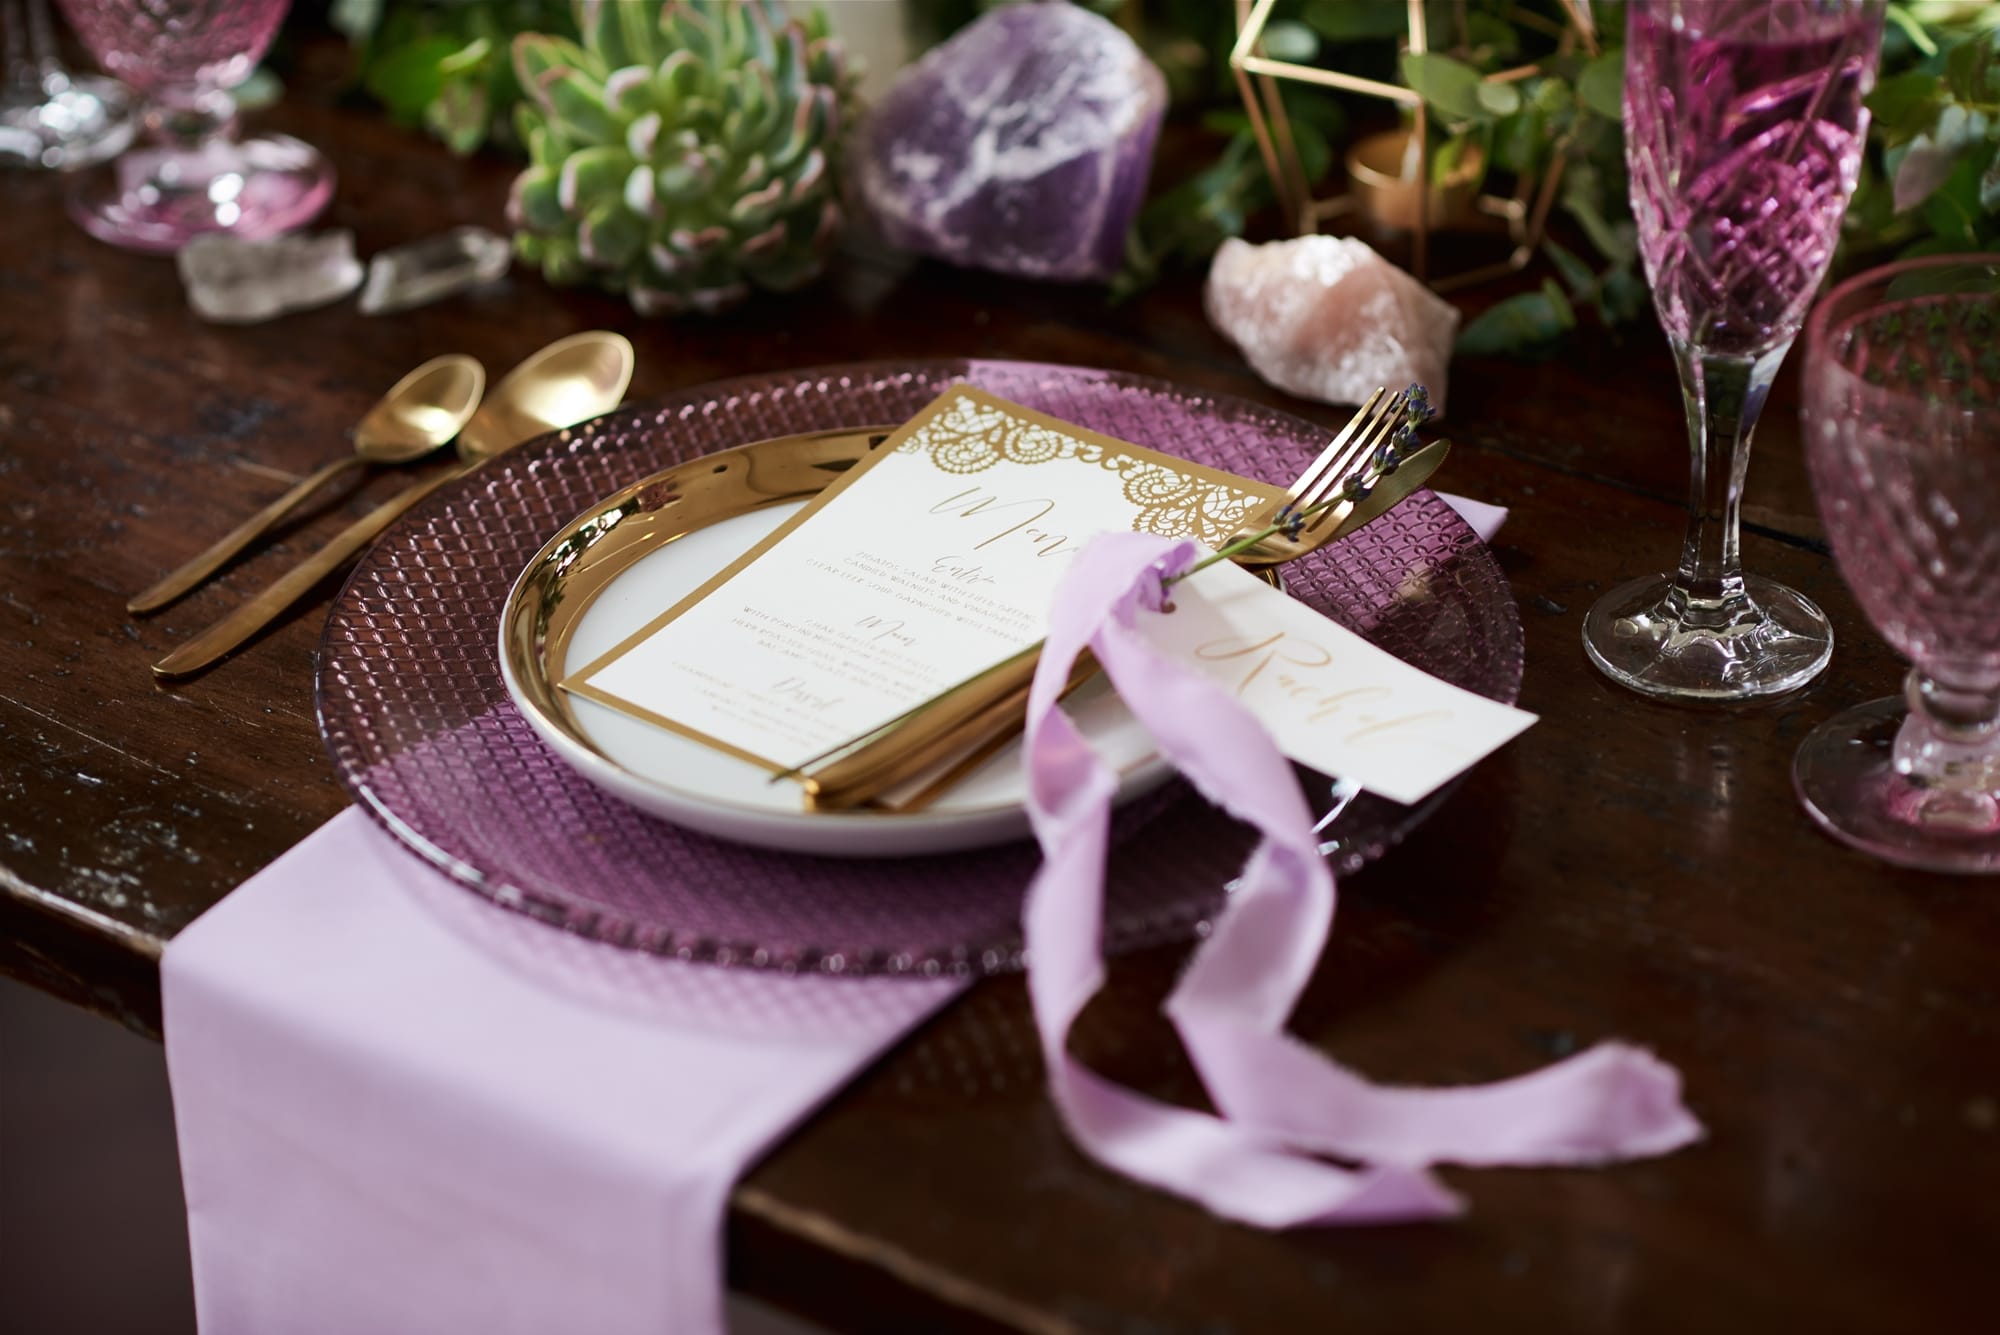 Amethyst and Lavender Styled Shoot Featuring Sleeve Wedding Dress